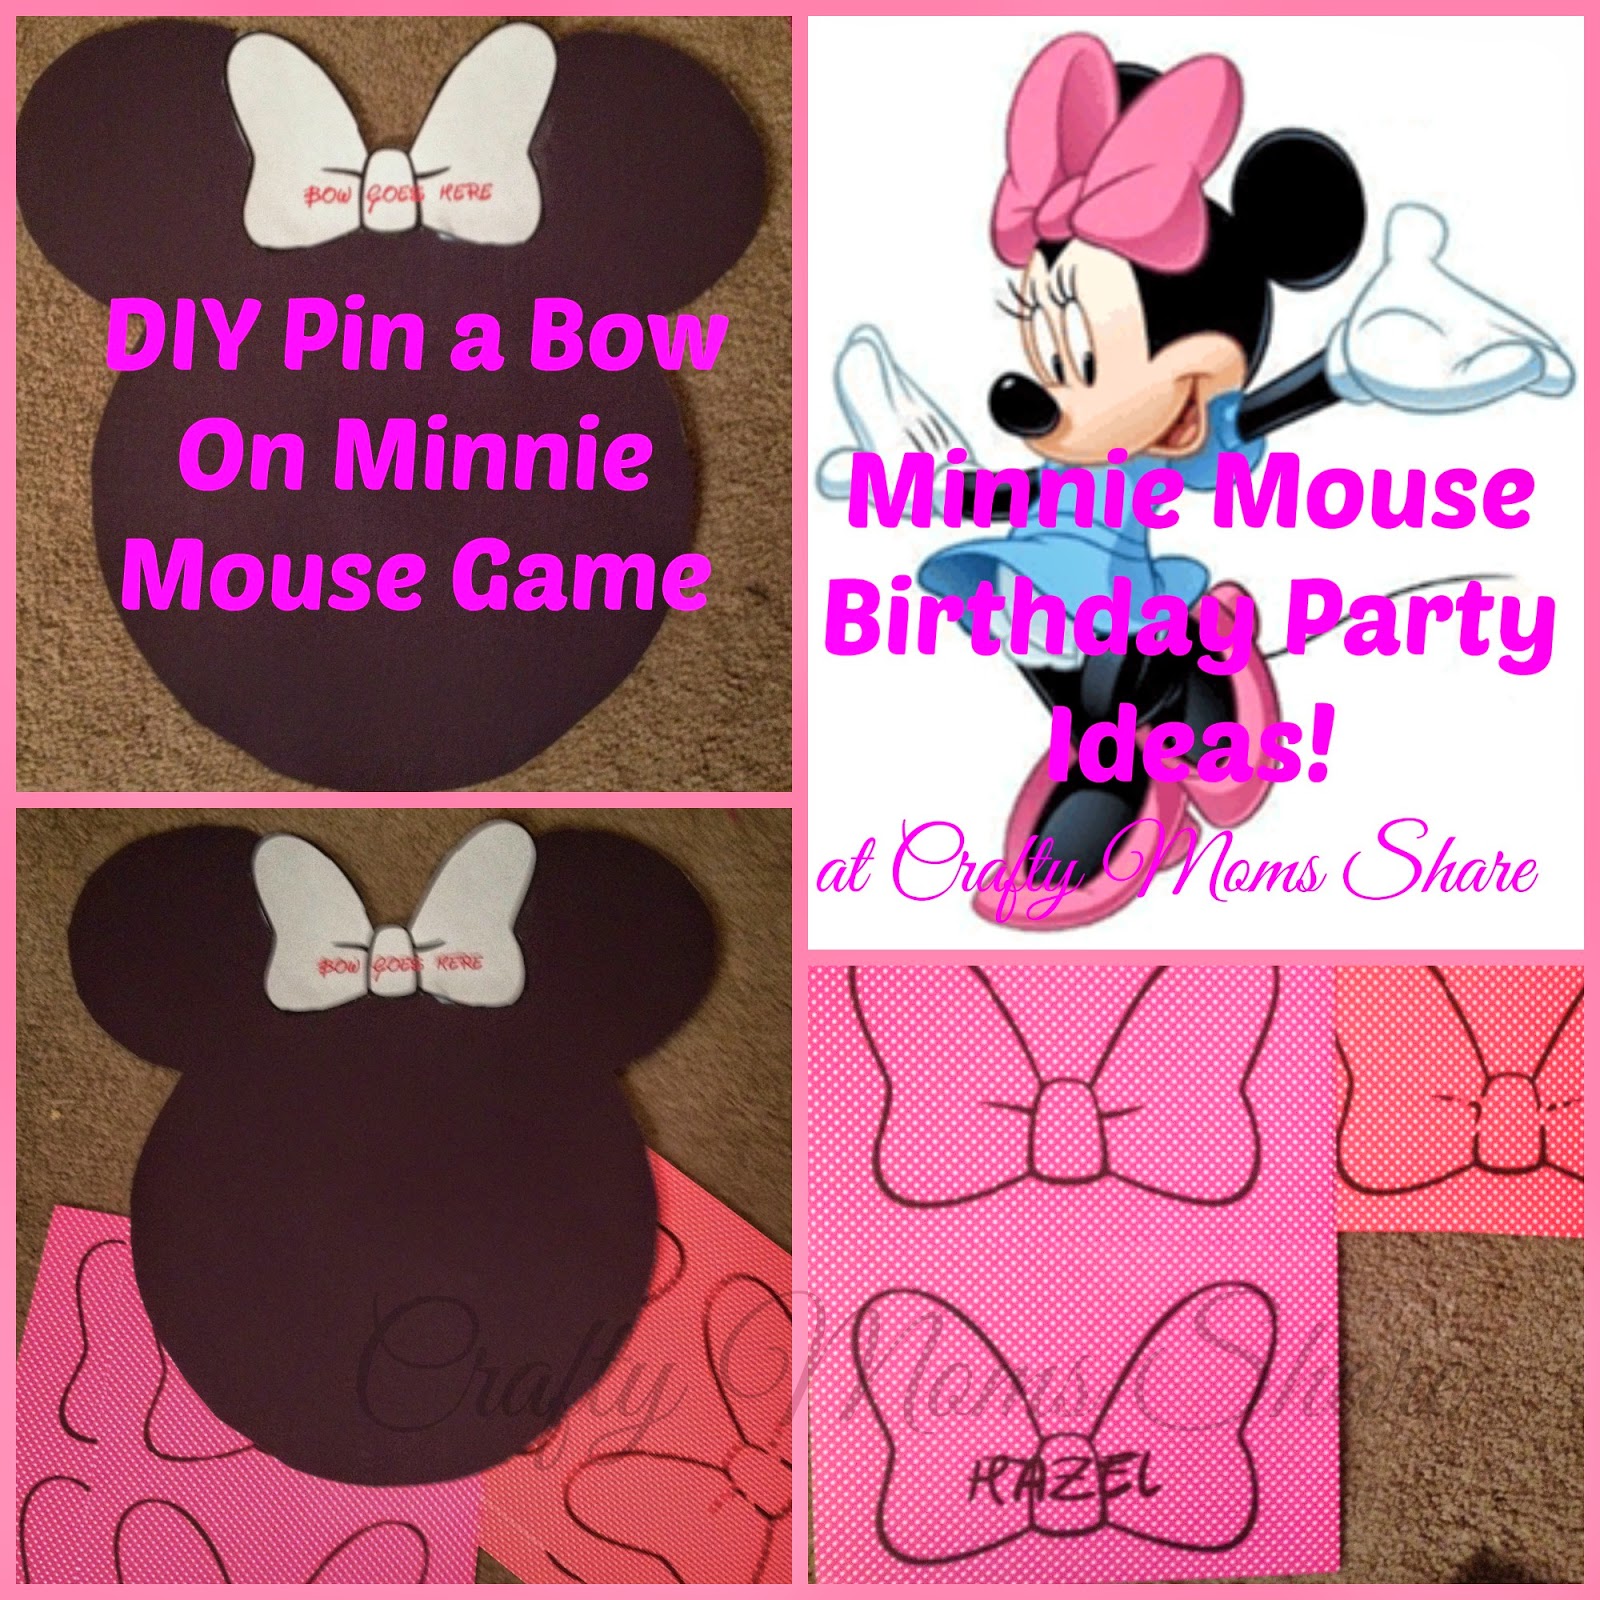 Crafty Moms Share DIY Pin The Bow On Minnie Mouse Game